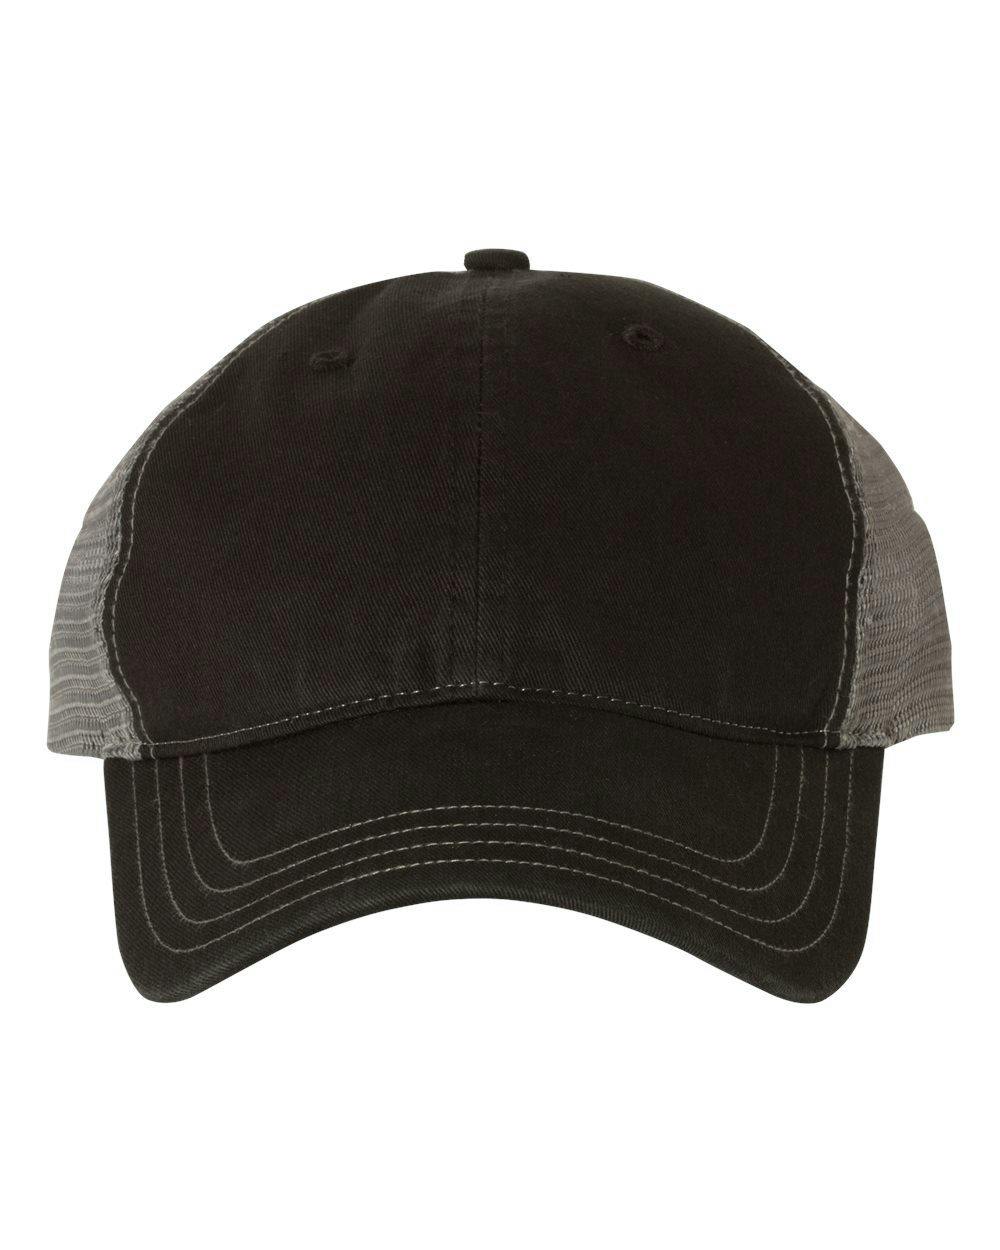 Image for Garment-Washed Trucker Cap - 111